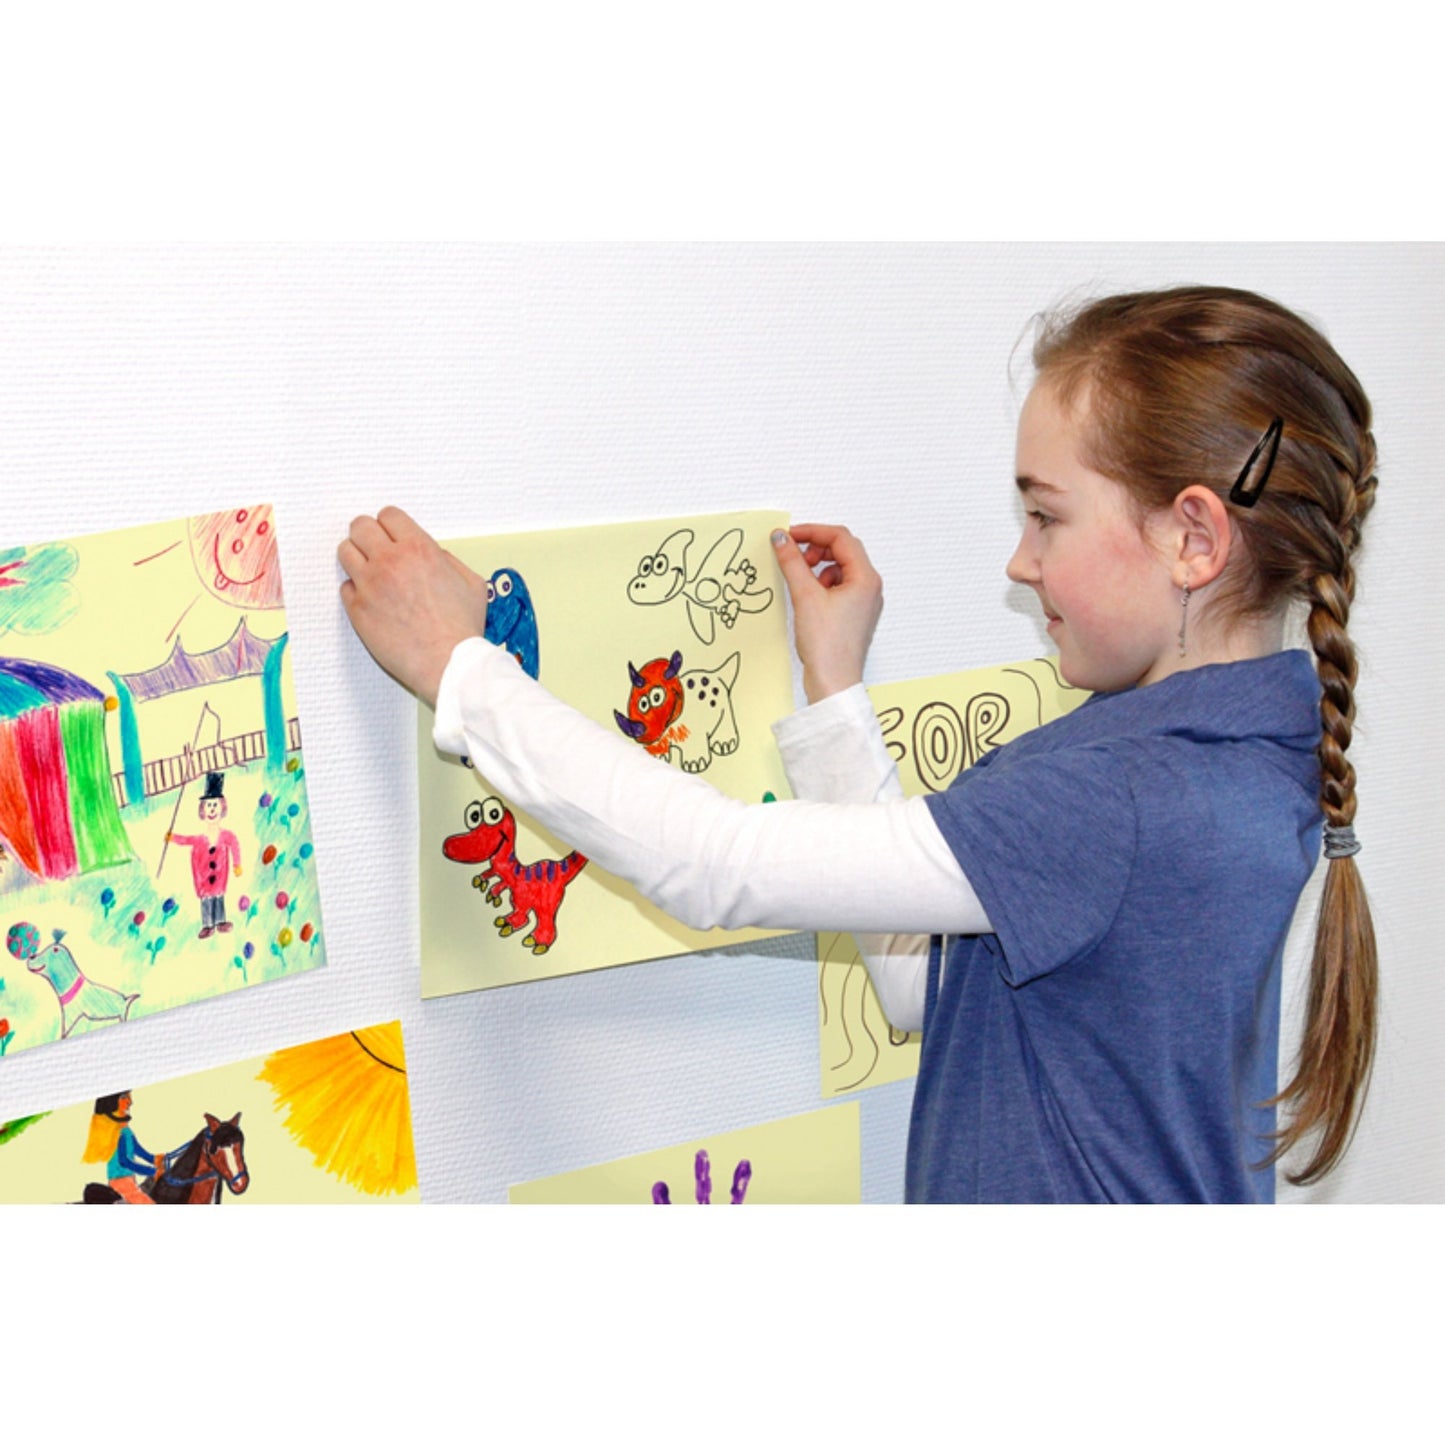 Giant Square Sticky-Note | Girl Sticks Sticky-Note on Wall | BeoVERDE.ie